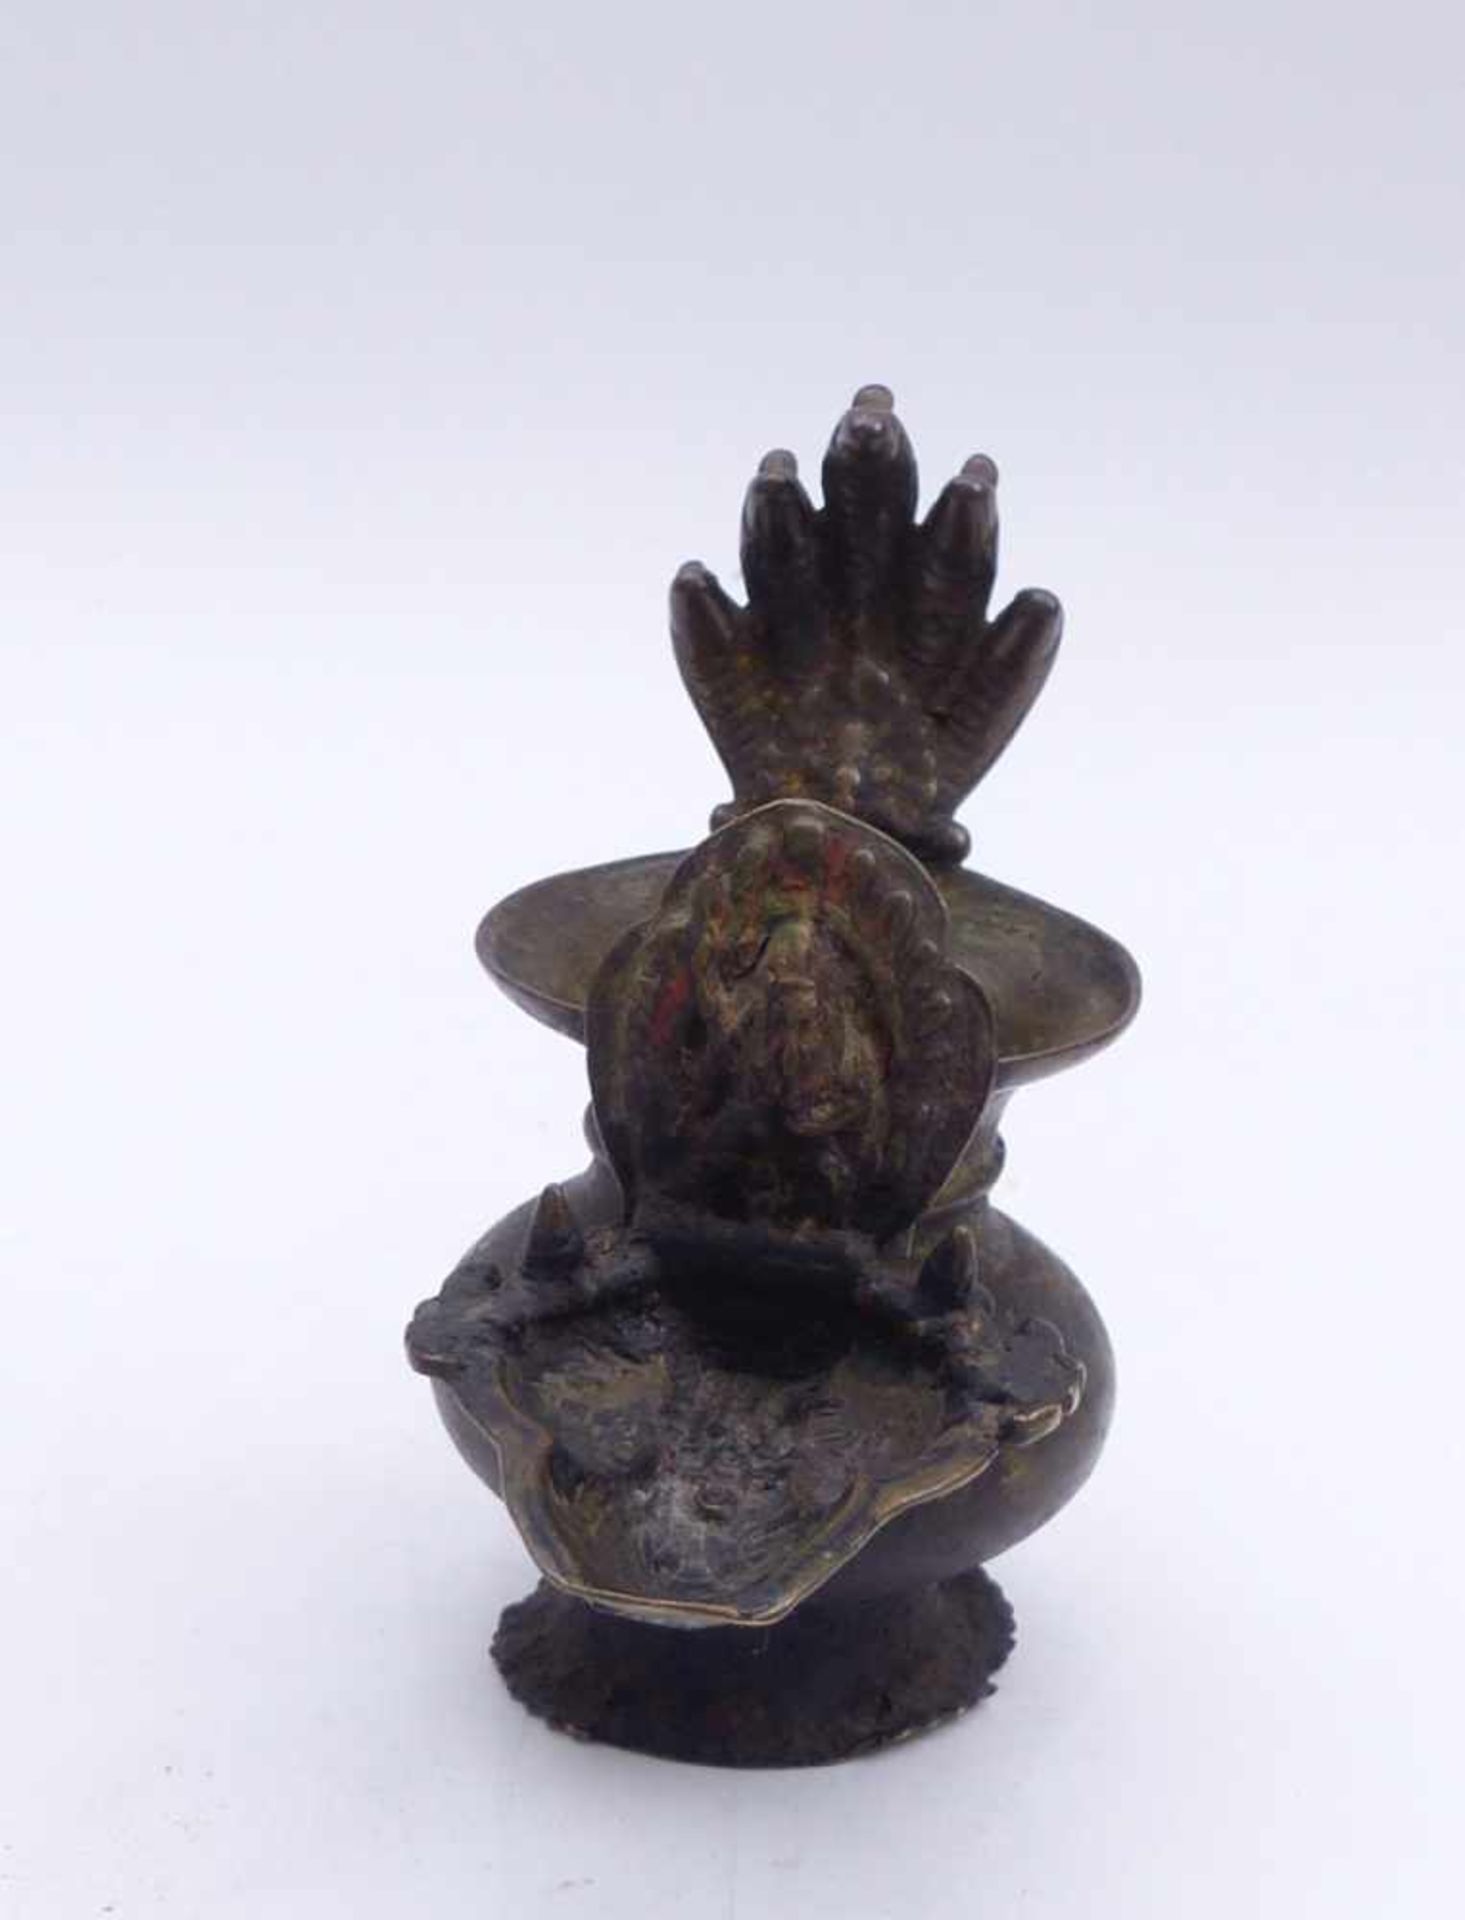 Oil lampIndiaFive-headed standing cobra on the leaf handle, curved wick bowl with Ganesha in - Bild 2 aus 2